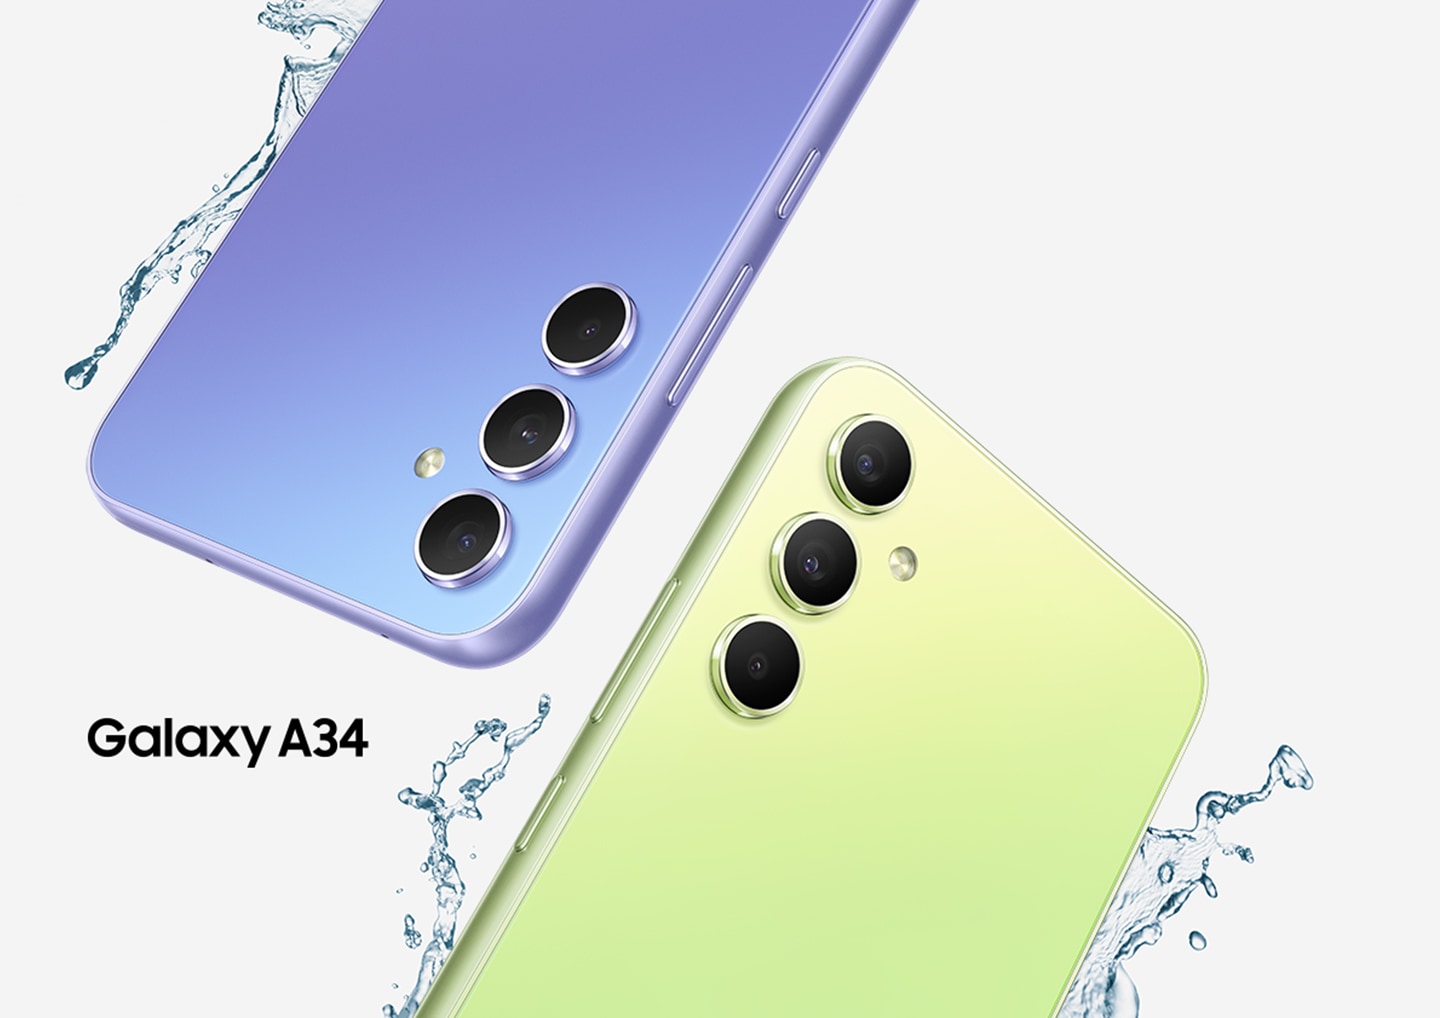 Two Galaxy A34 5Gs show their top halves of their backsides, one in Awesome Violet and the other in Awesome Lime. Water droplets are splashing around the devices "Awesome 5G“.